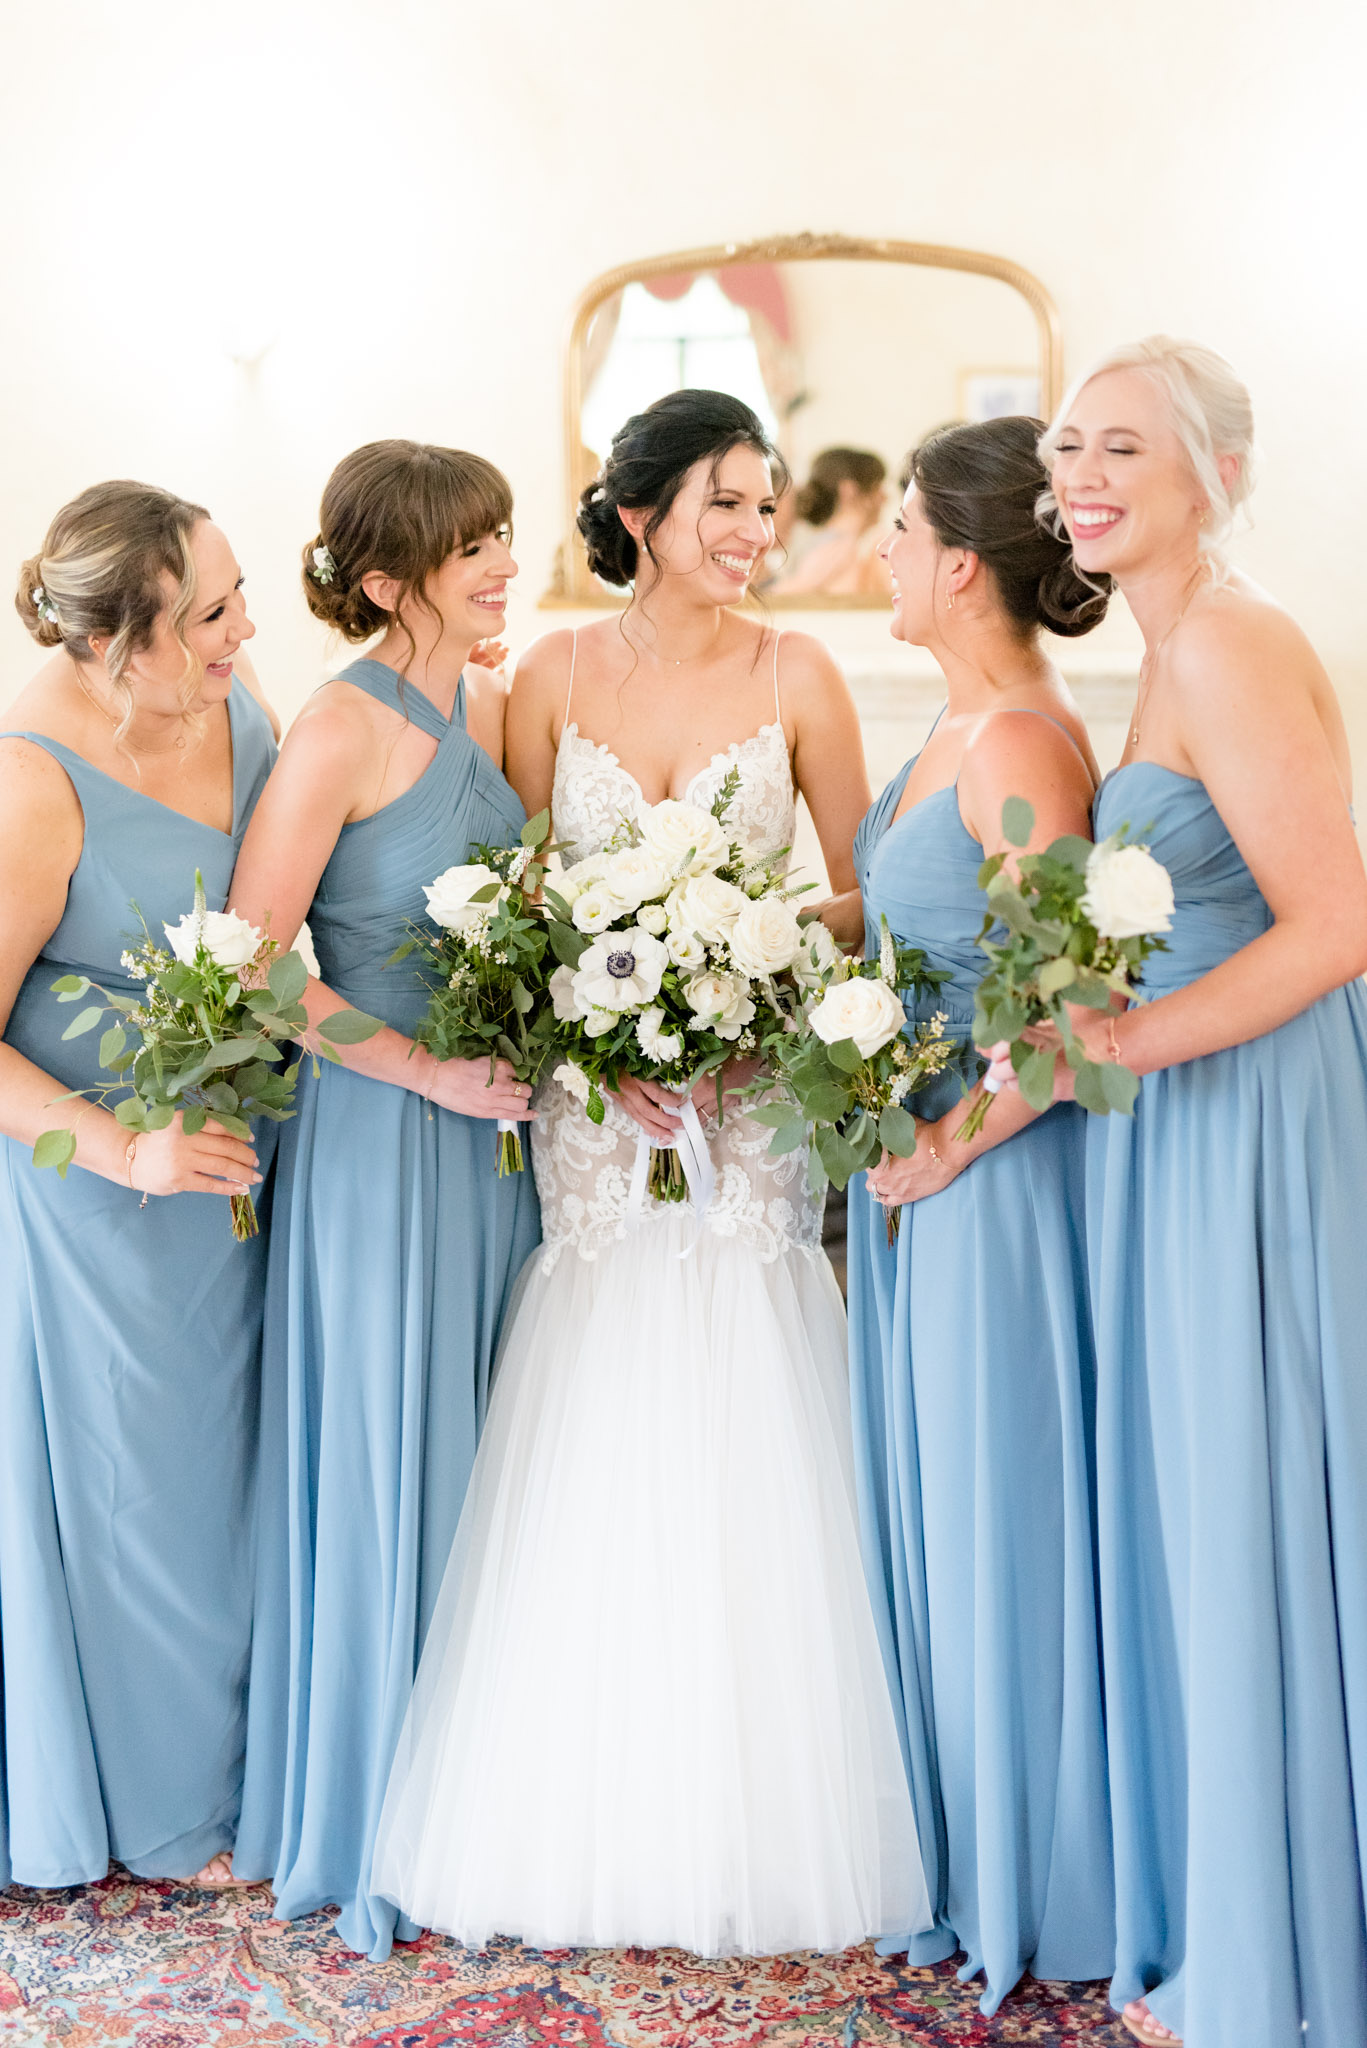 Bride and bridesmaids smile at each other.